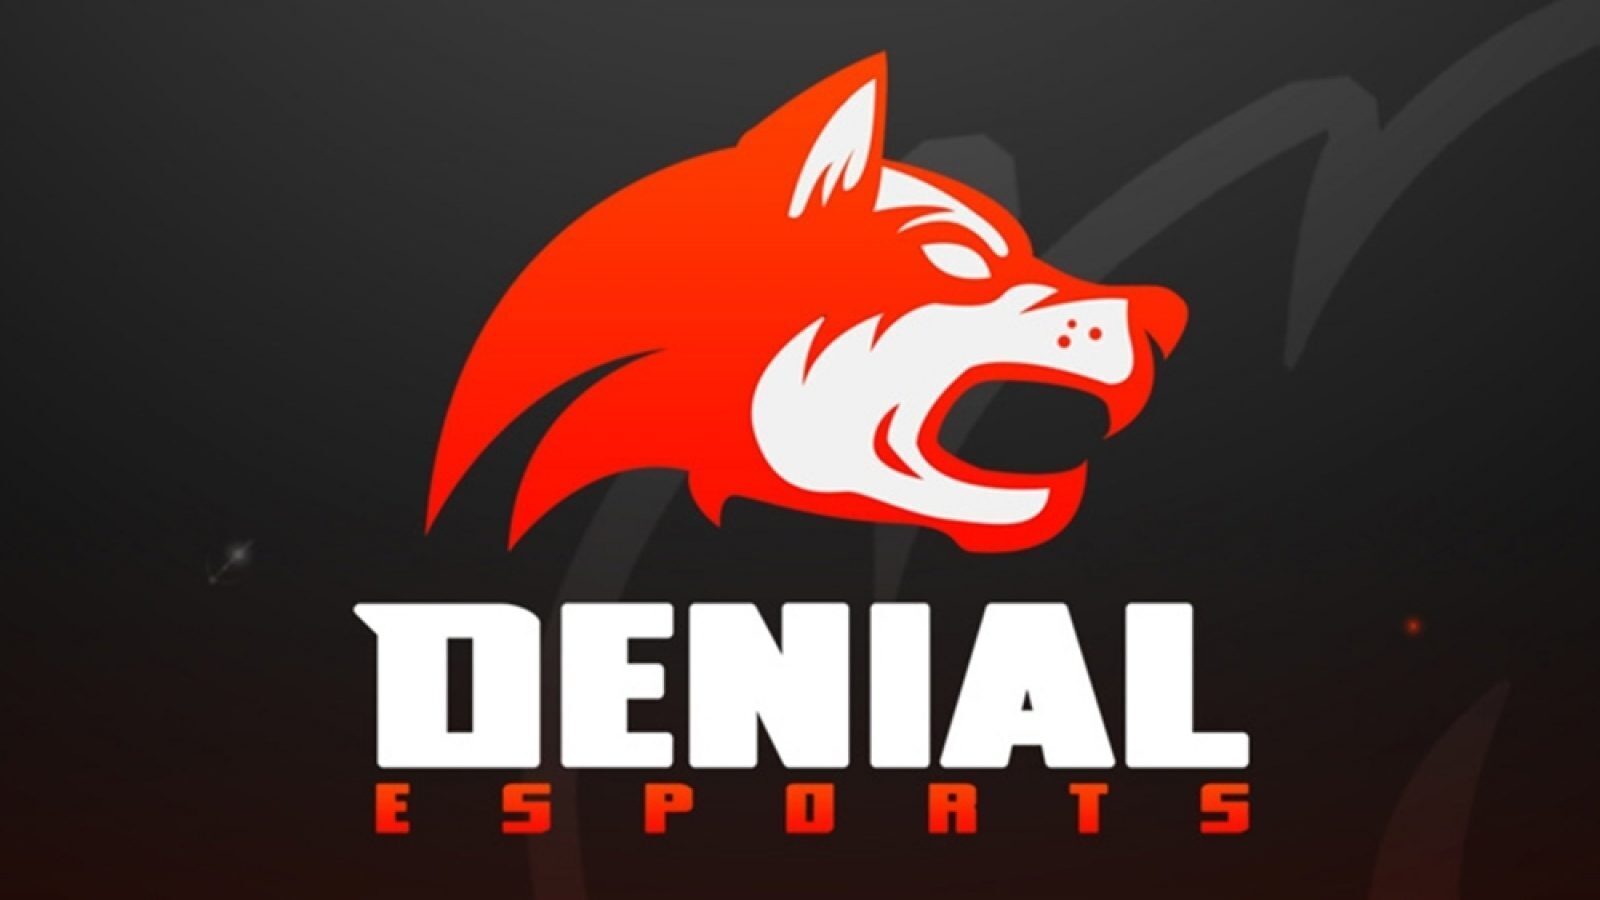 Former CEO of Denial Esports, Zach Smith, is under fire this week as numerous allegations have been made public regarding player payments.